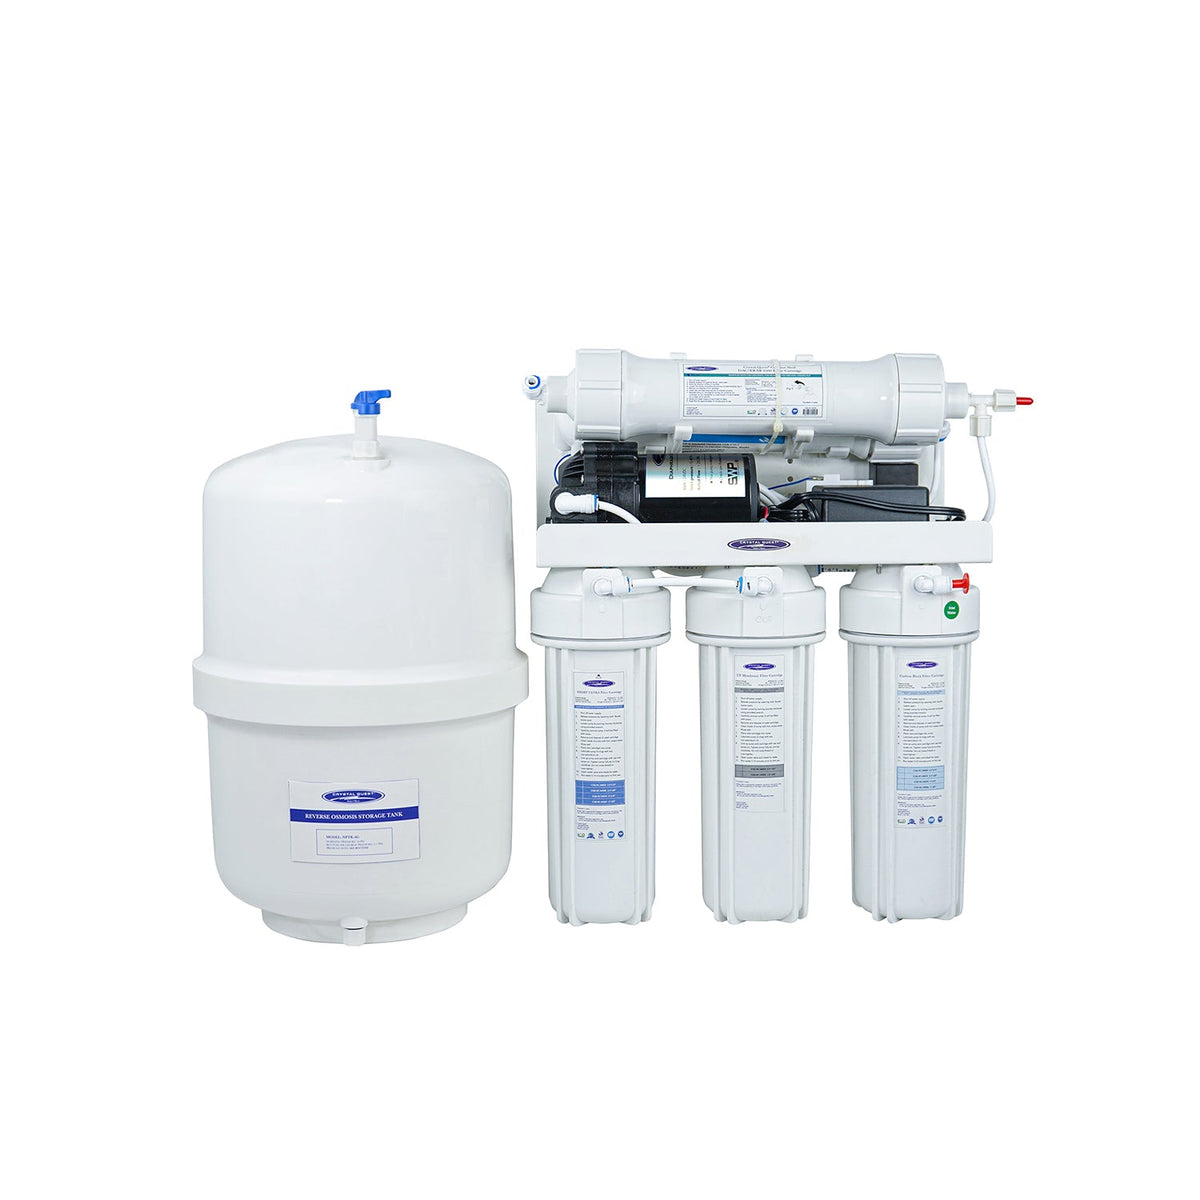 Thunder Ultrafiltration/Reverse Osmosis Under Sink Water Filter | 1000MP | 15 Stages of Filtration - Reverse Osmosis System - Crystal Quest